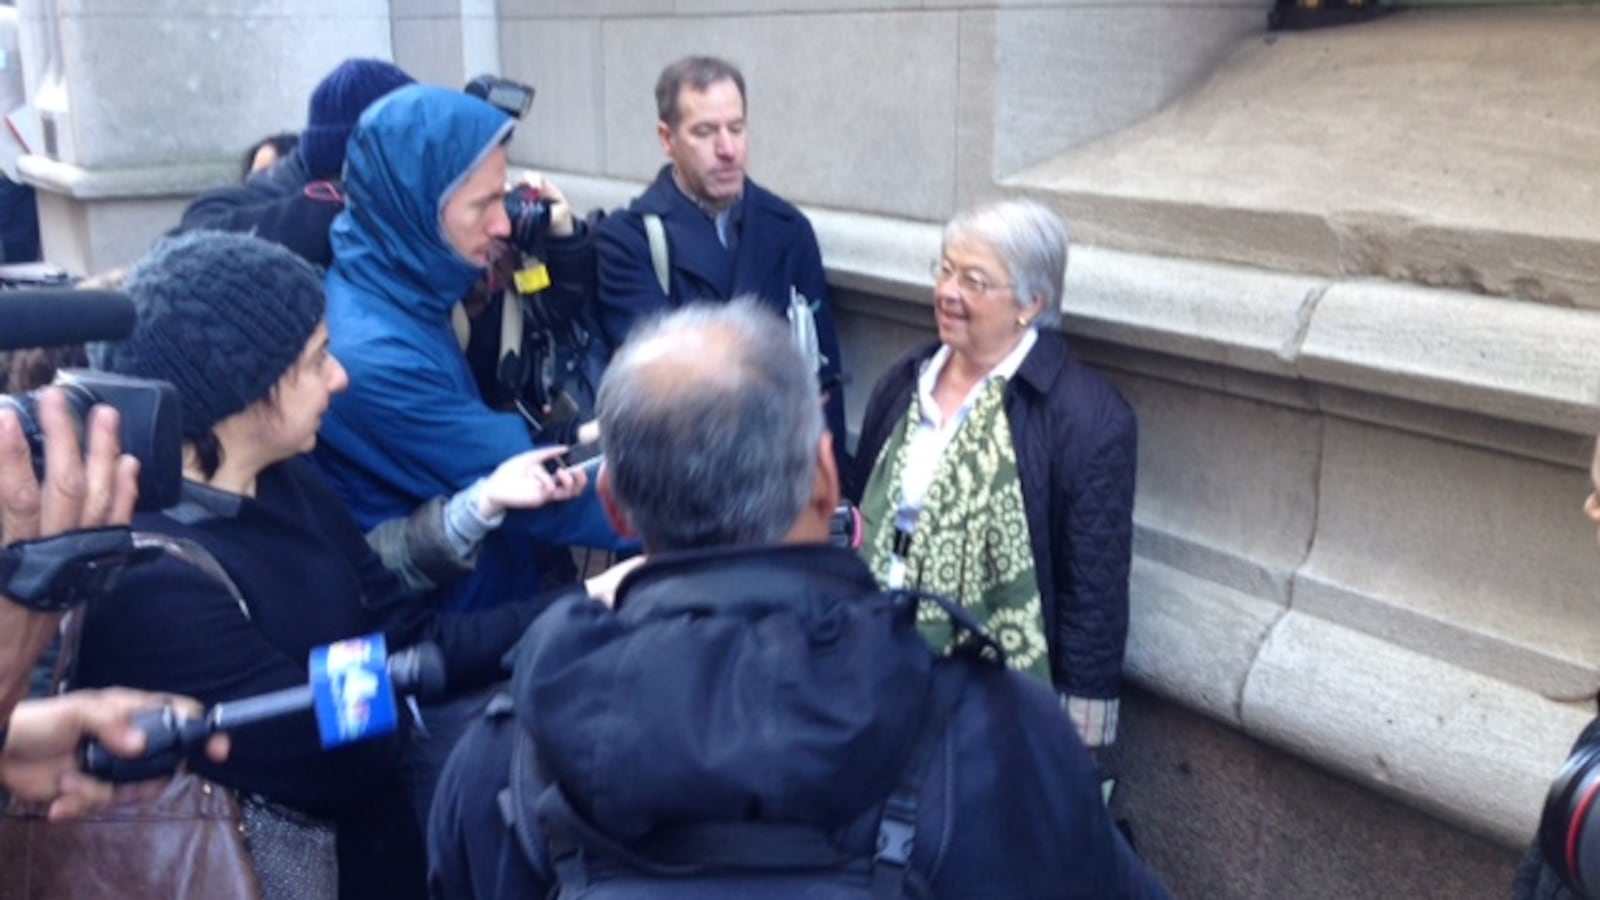 A larger press scrum than normal questions Chancellor Fariña after leaving a meeting with charter school leaders.